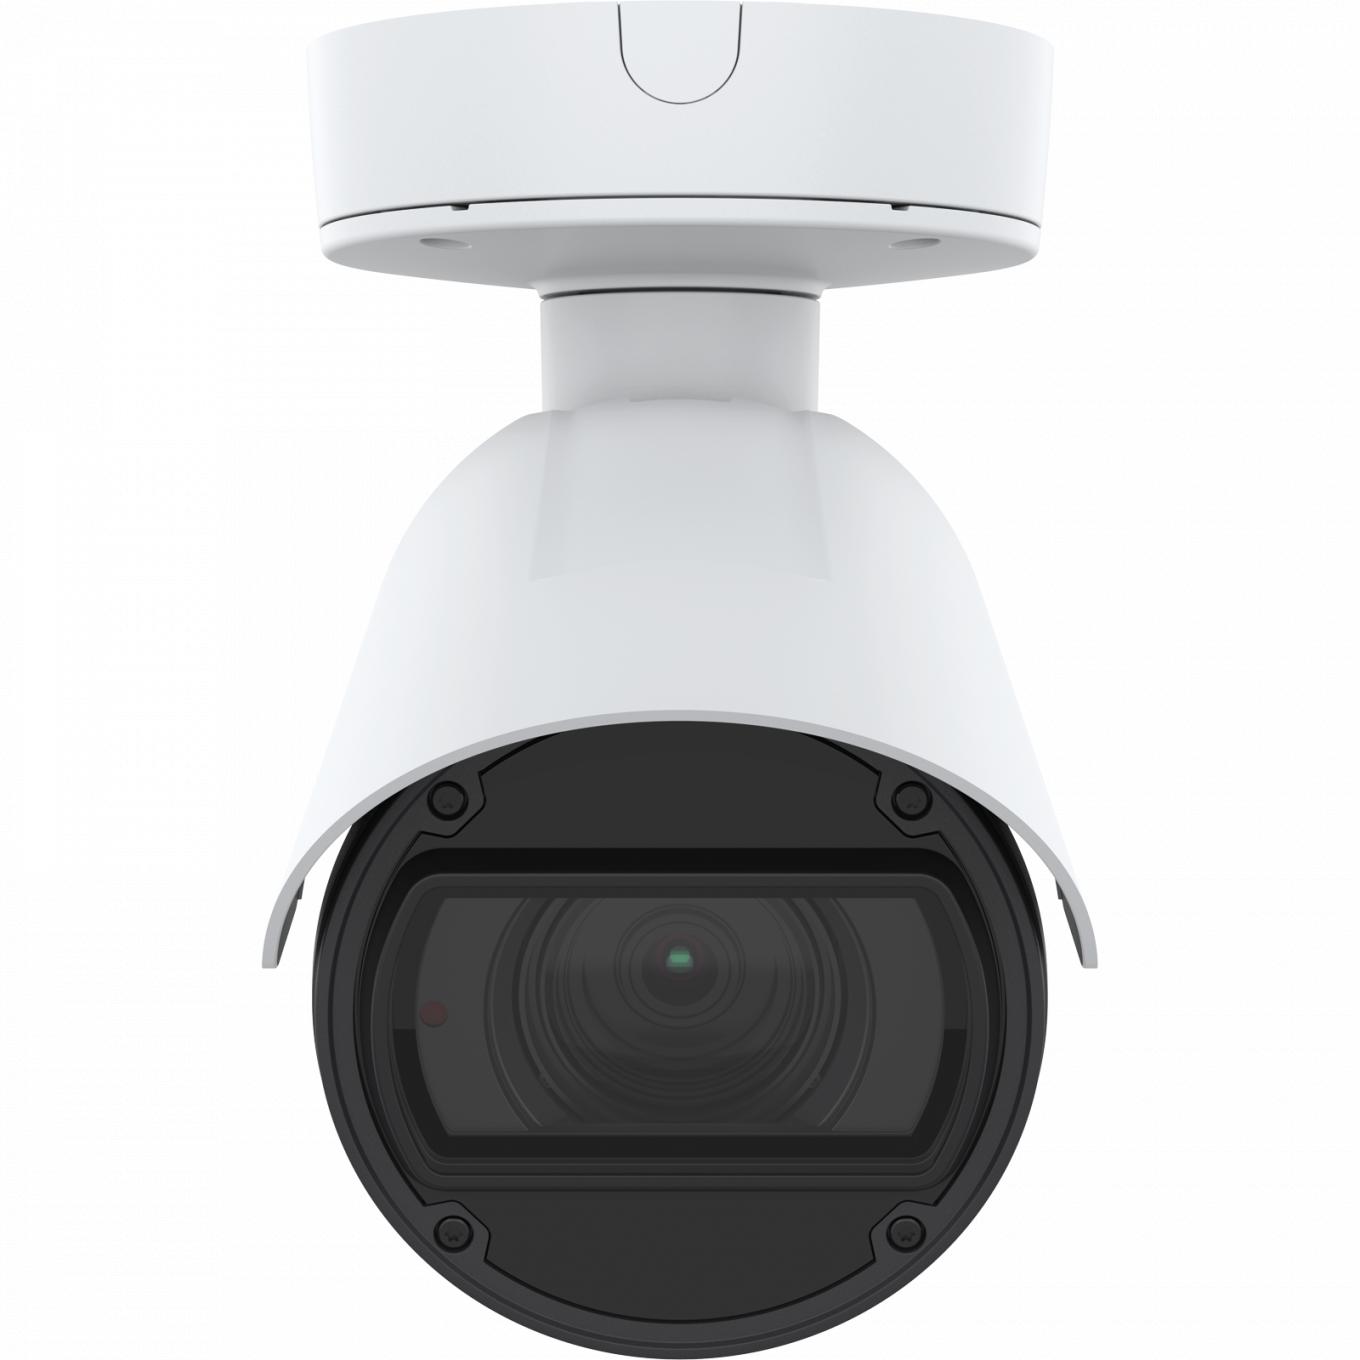 AXIS Q1785-LE Network Camera | Axis Communications